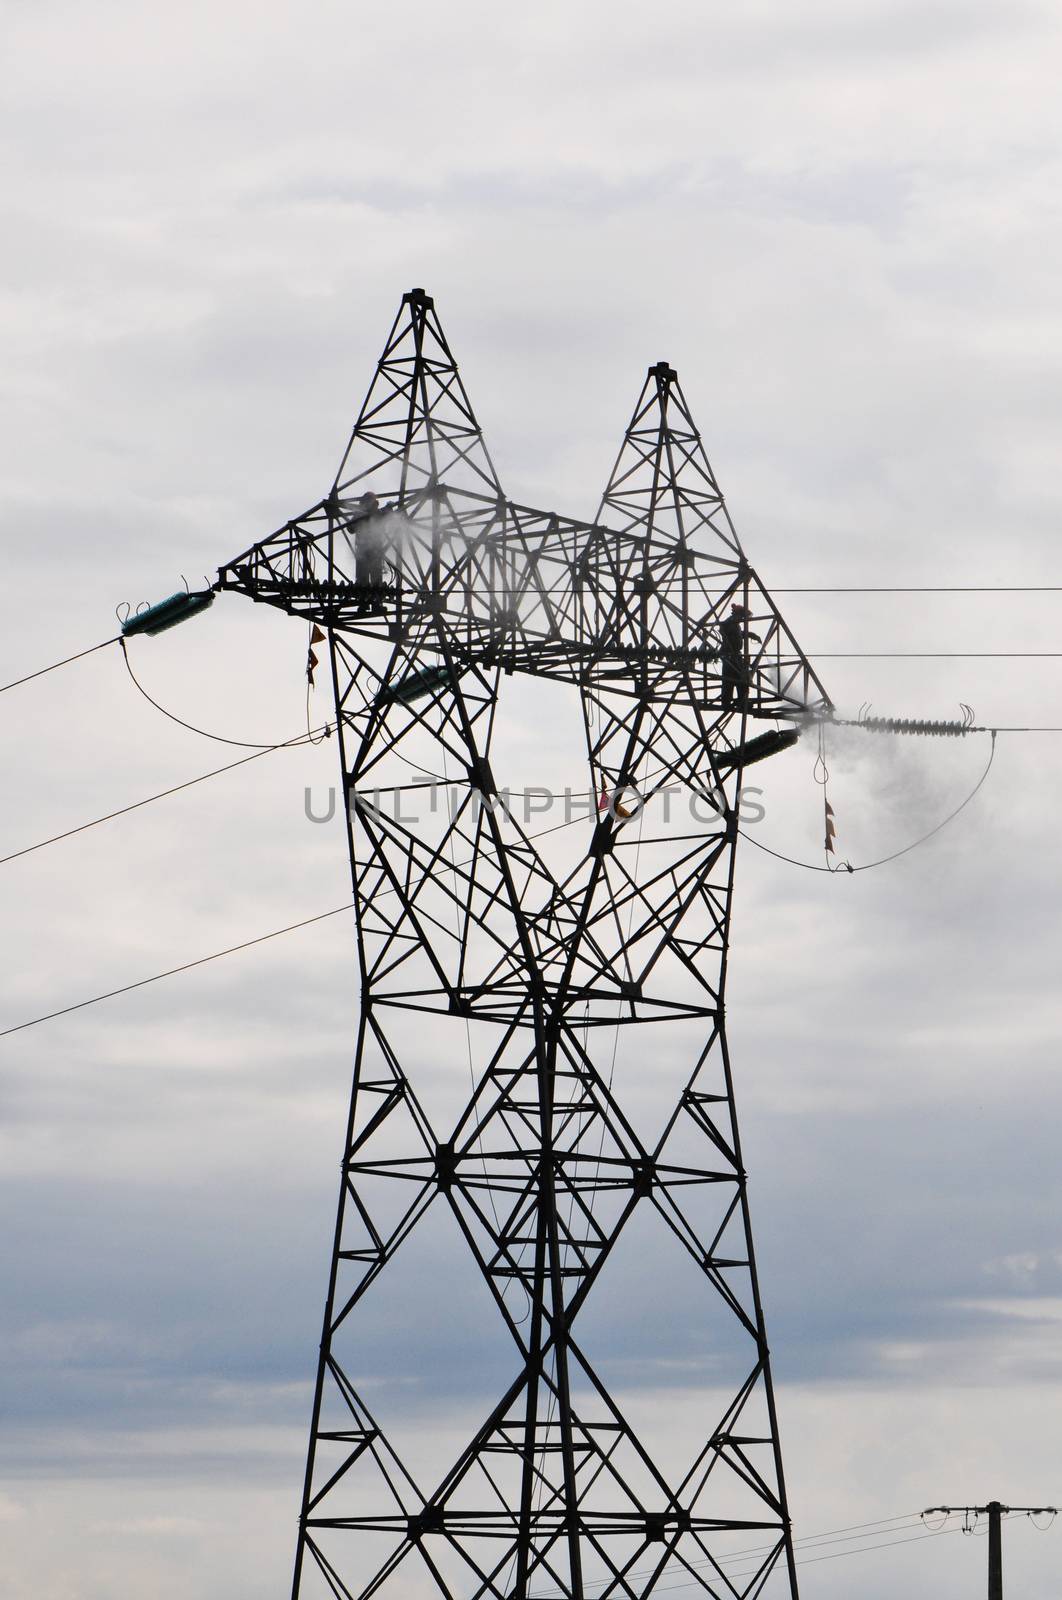 Two Guys Cleaning Big Electrical Pylon with a Cloudy Sky